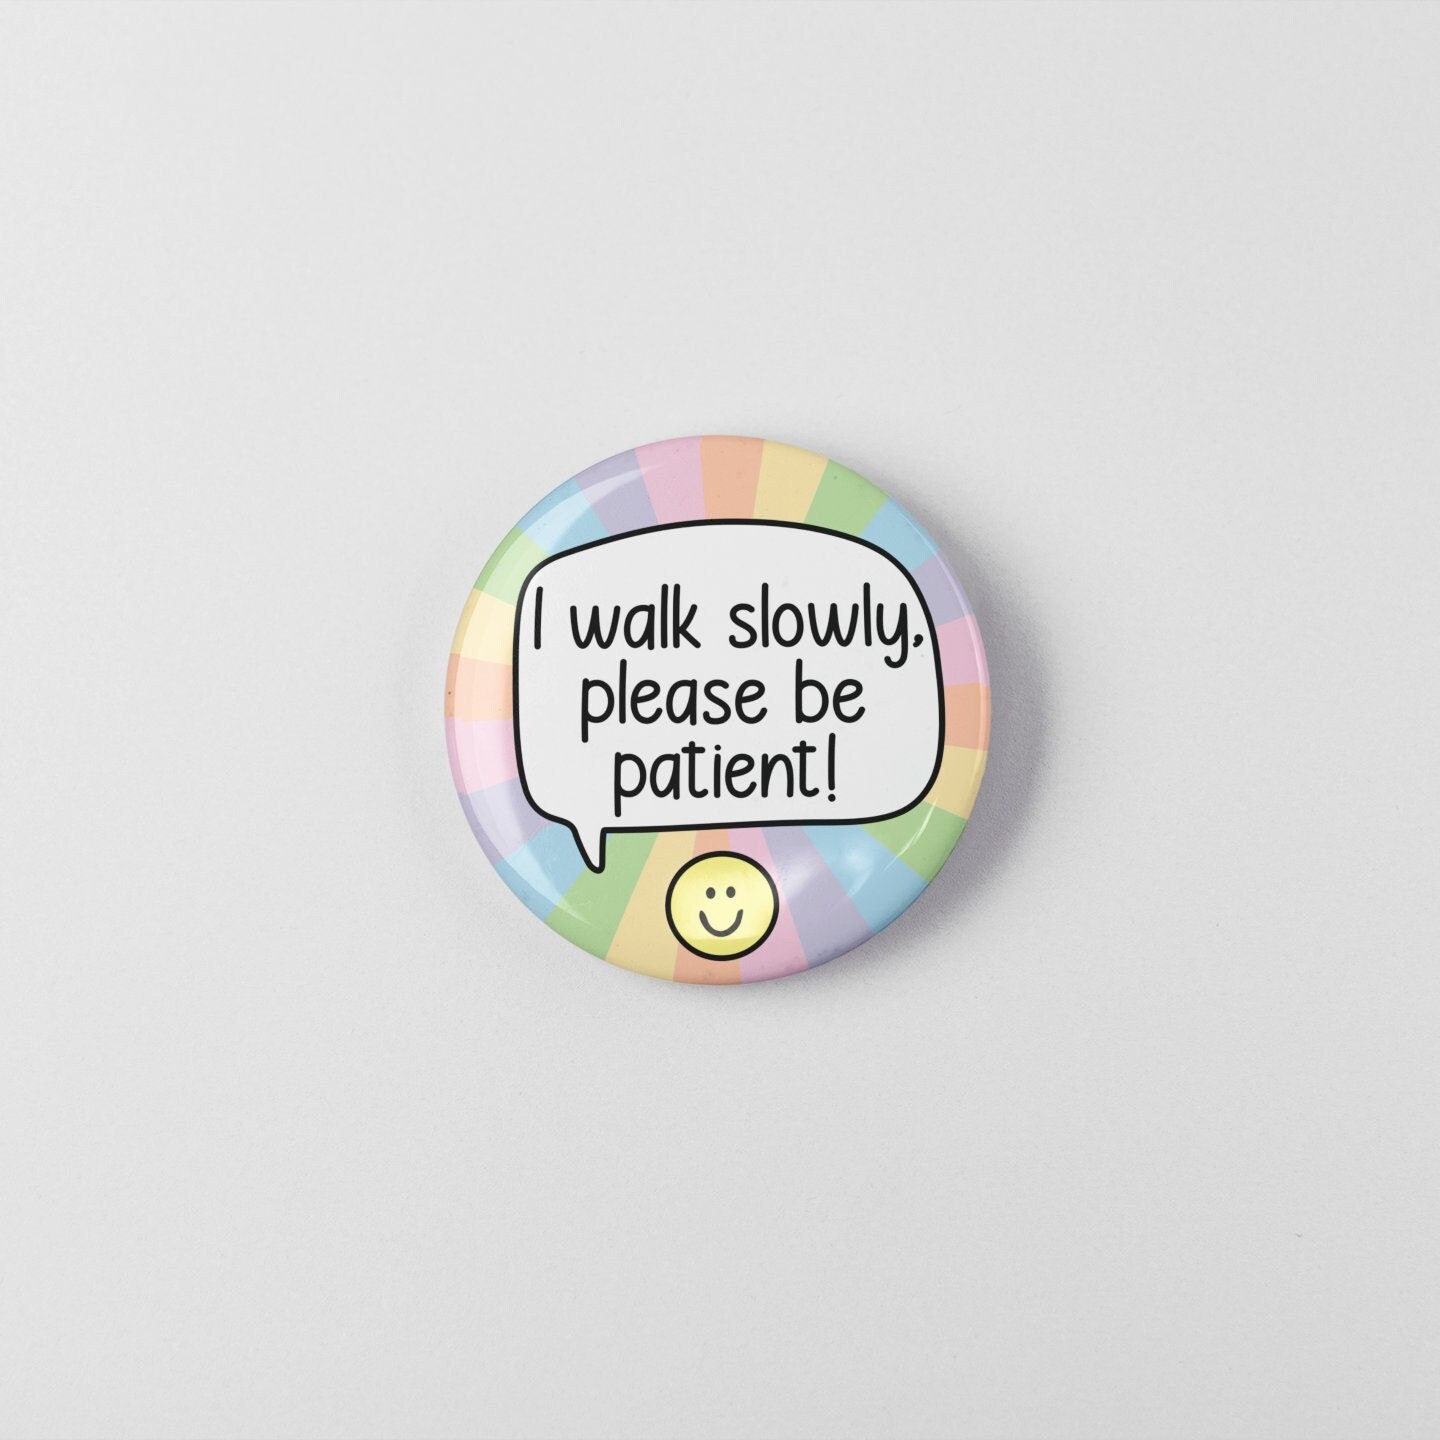 I Walk Slowly Please Be Patient! - Badge Pin | Hidden Disability - Invisible Illness